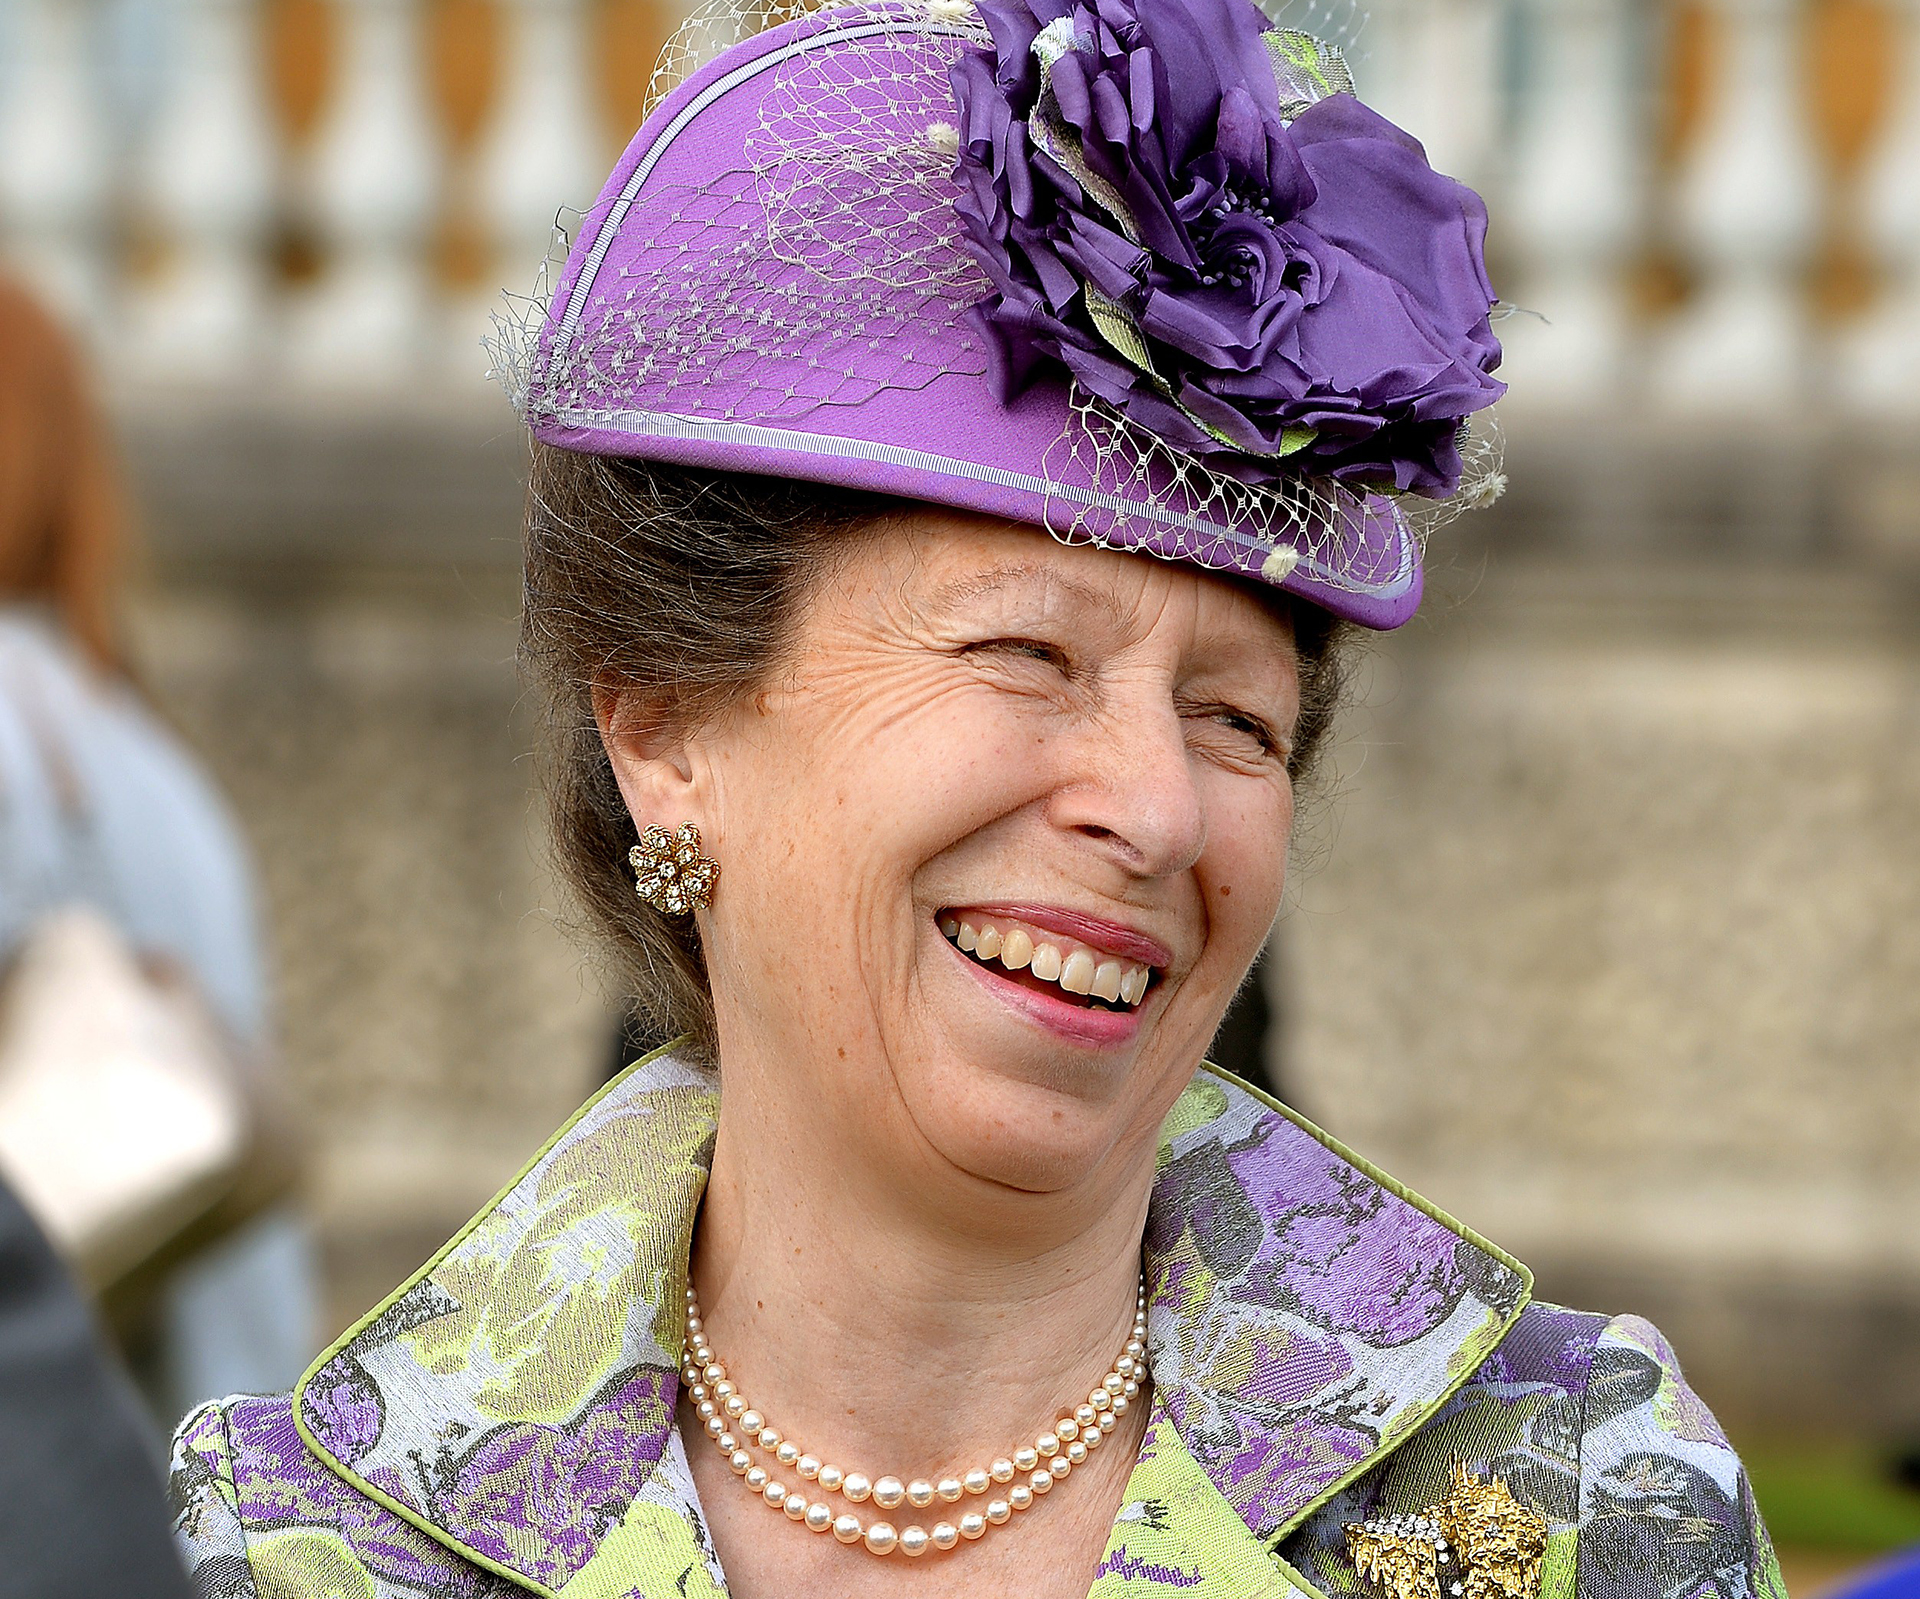 Guests at royal garden party treated to a rare Princess Anne smile